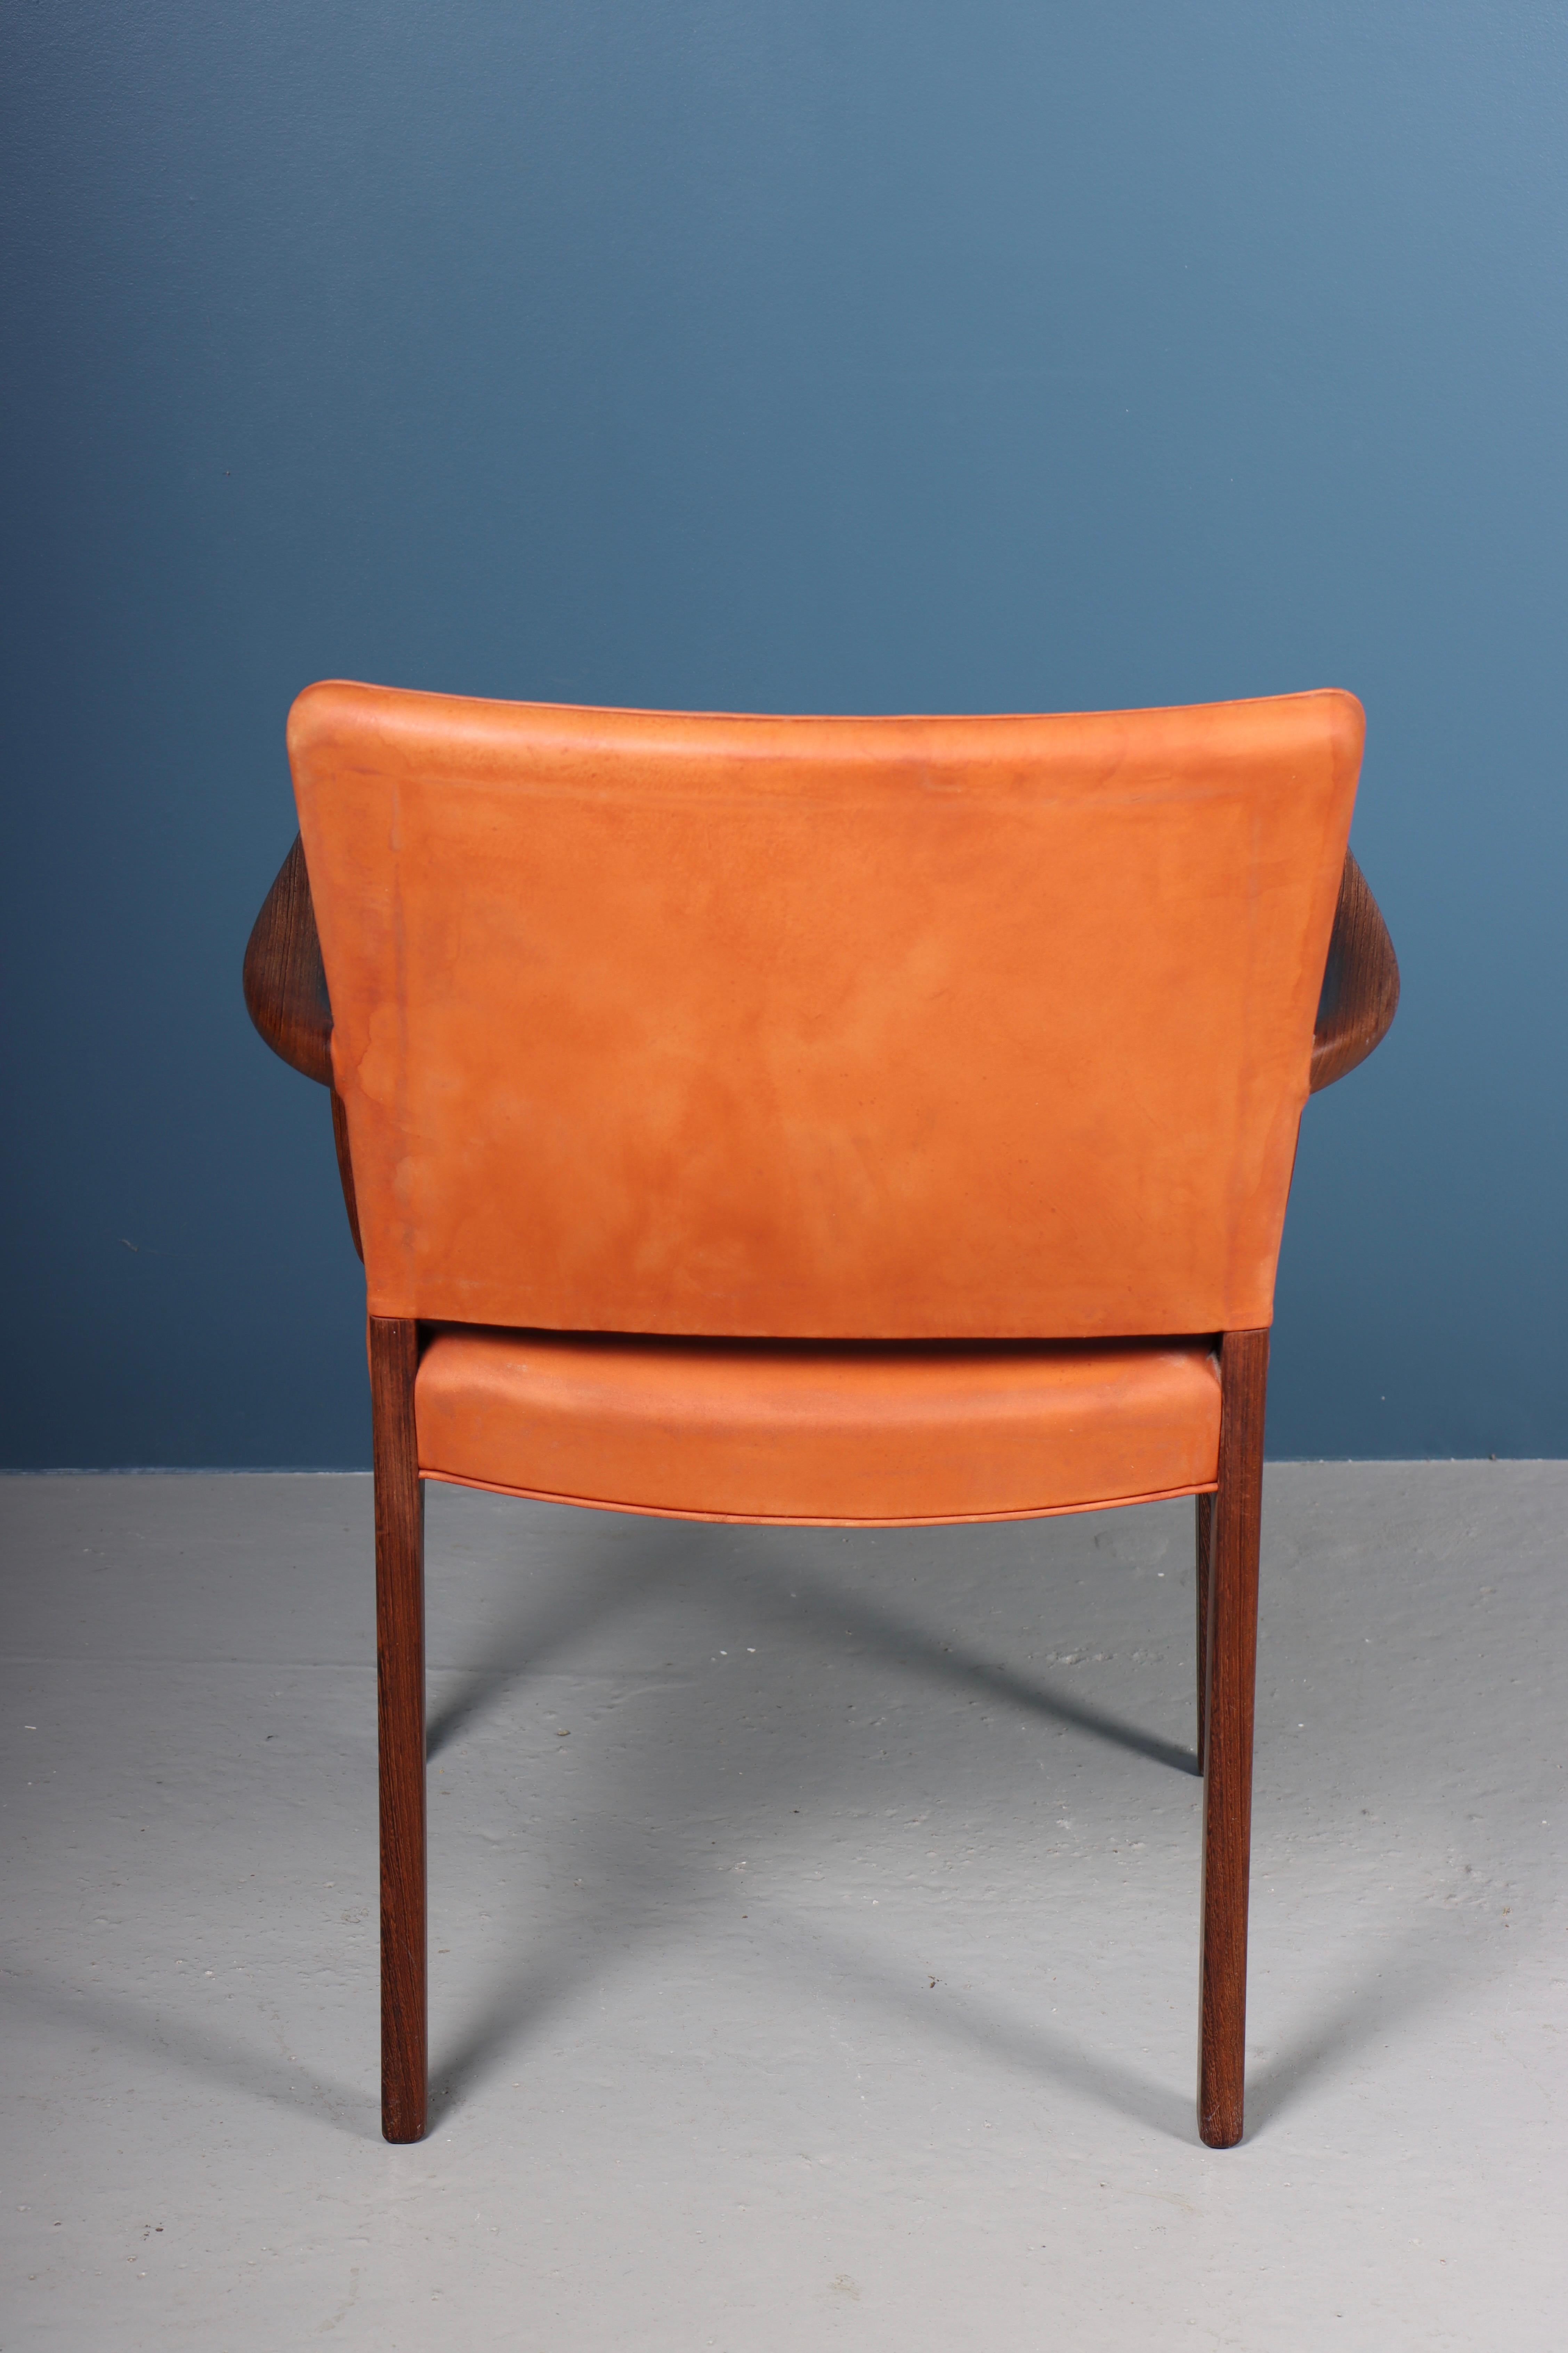 Rare Midcentury Armchair in Patinated Leather and Wenge, Danish Design, 1950s In Good Condition For Sale In Lejre, DK